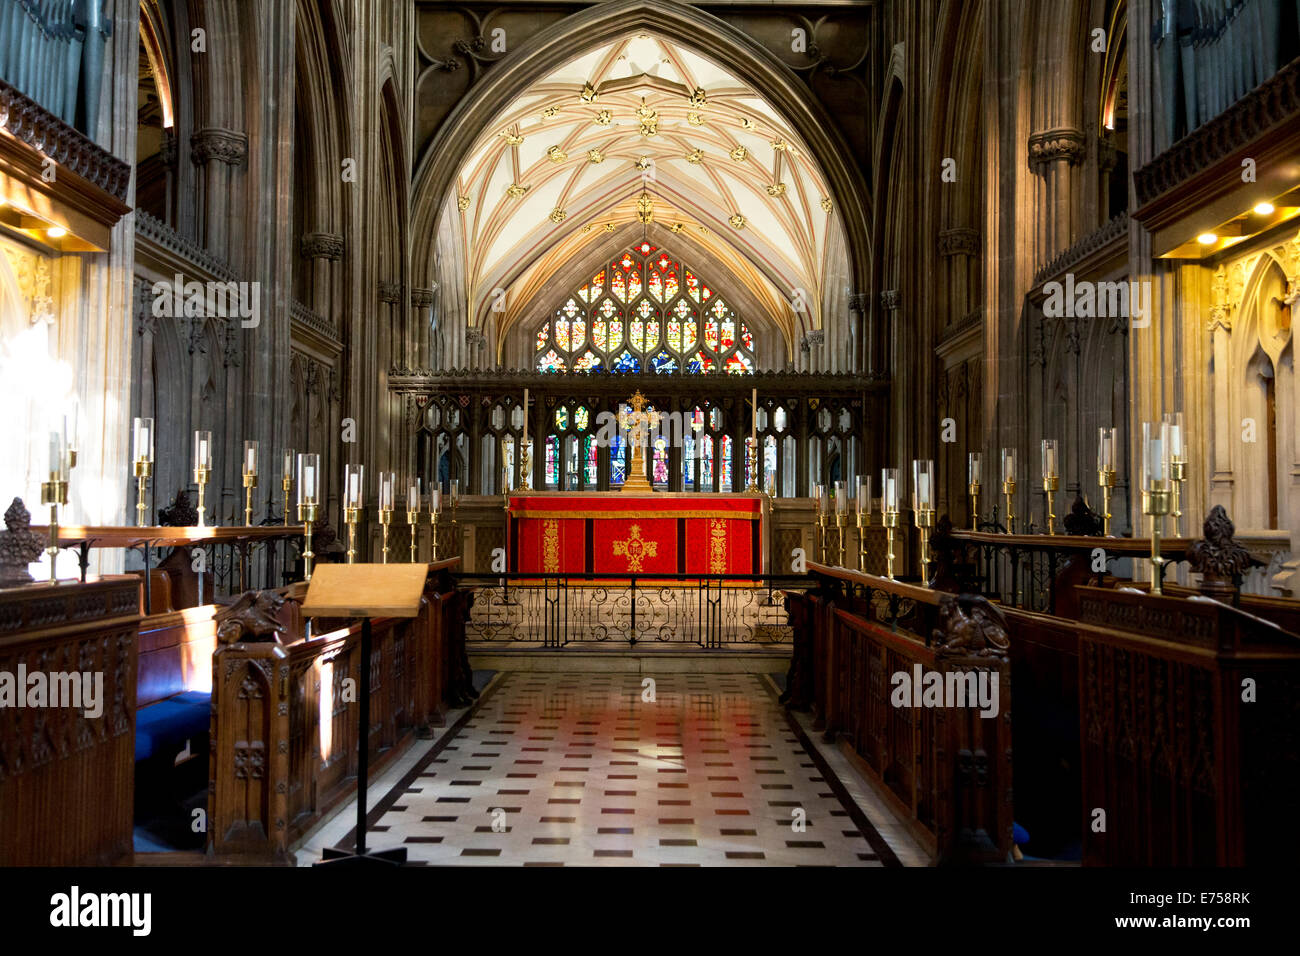 View of the Lady Chapel from the Choir & Chancel at St Mary Redcliffe Church, Bristol, England, UK. Stock Photo